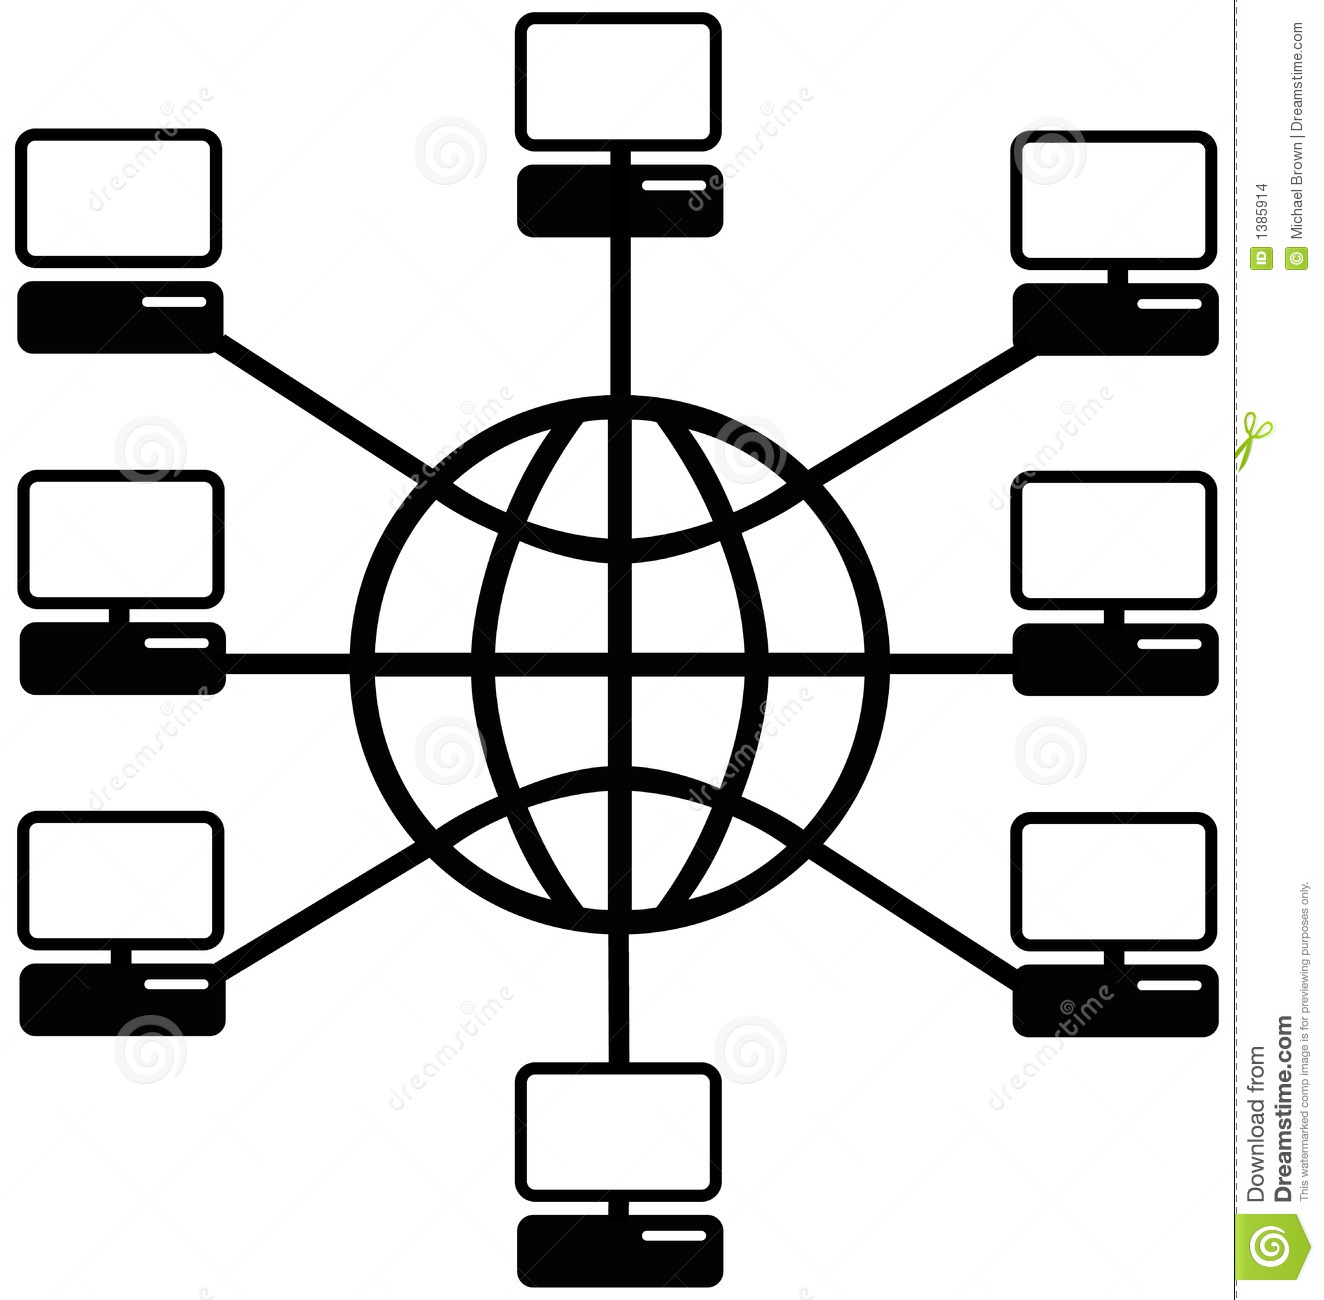 Global Computer Network Icon